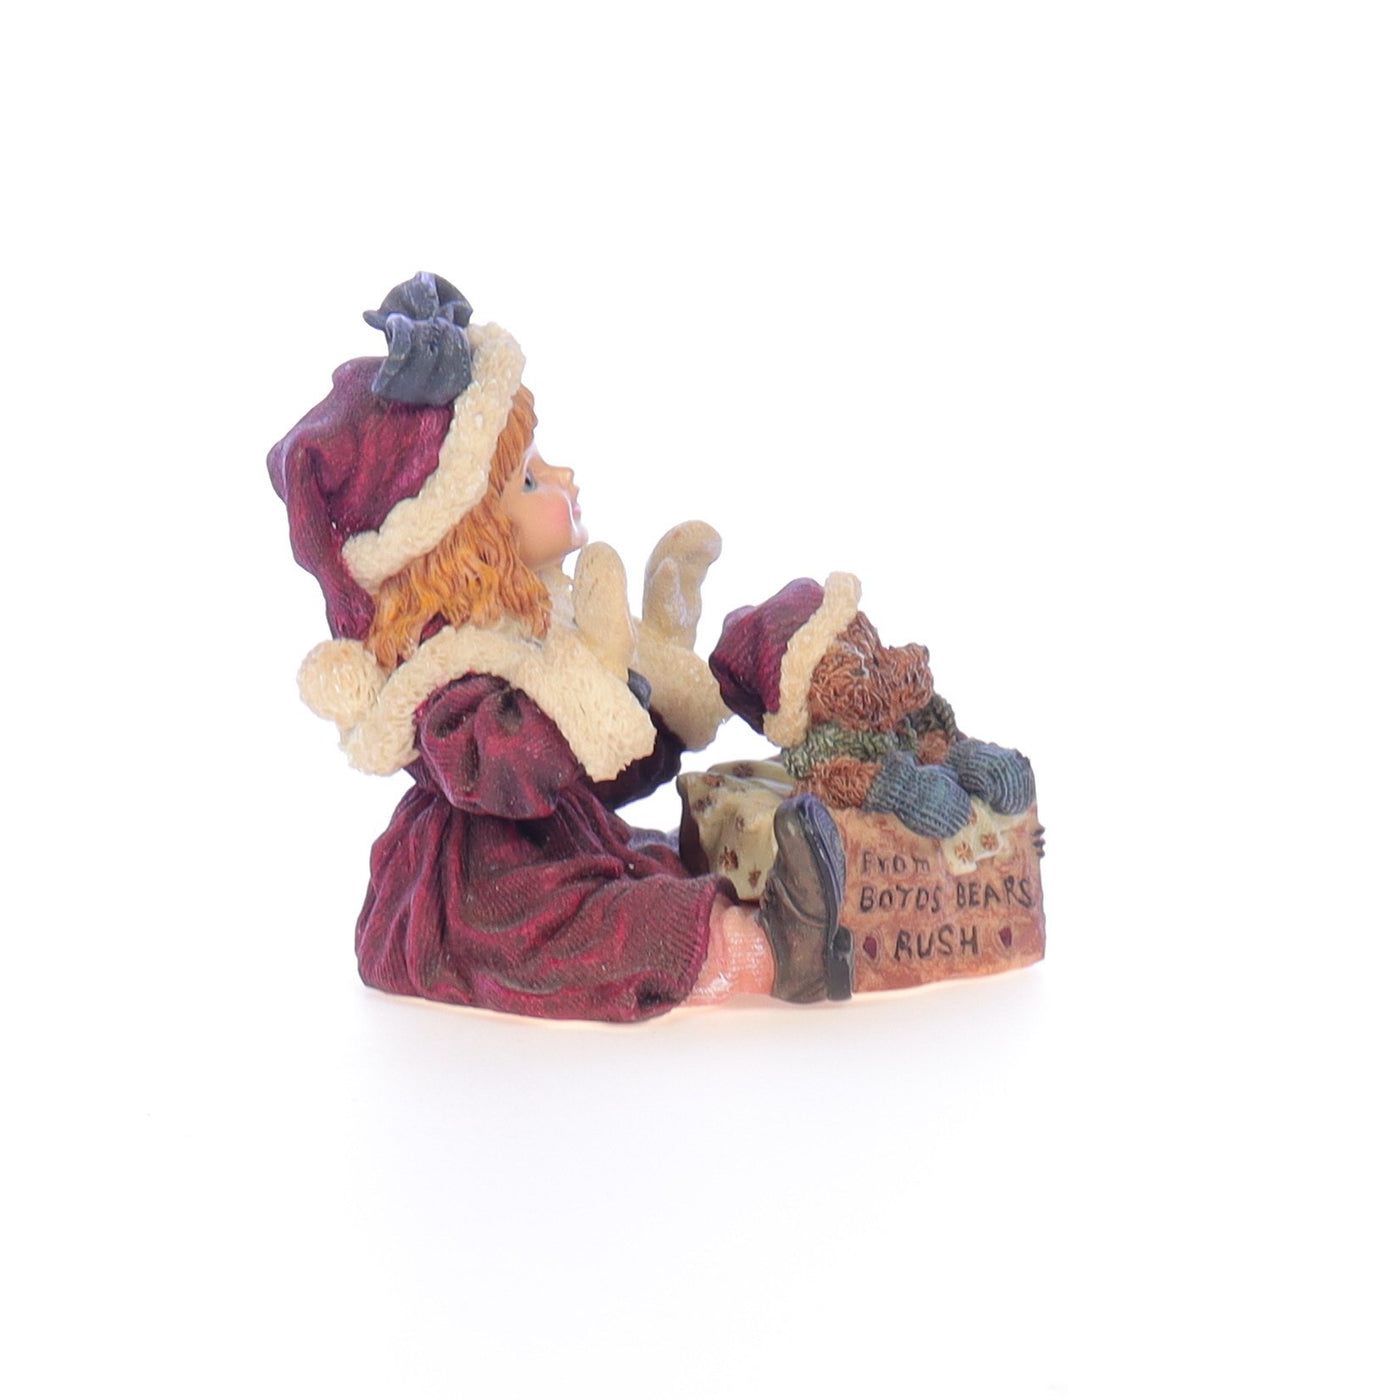 Boyds_Bears_Dollstone_Resin_Figurine_Kimberly_with_Klaus_Special_Delivery_3547_07